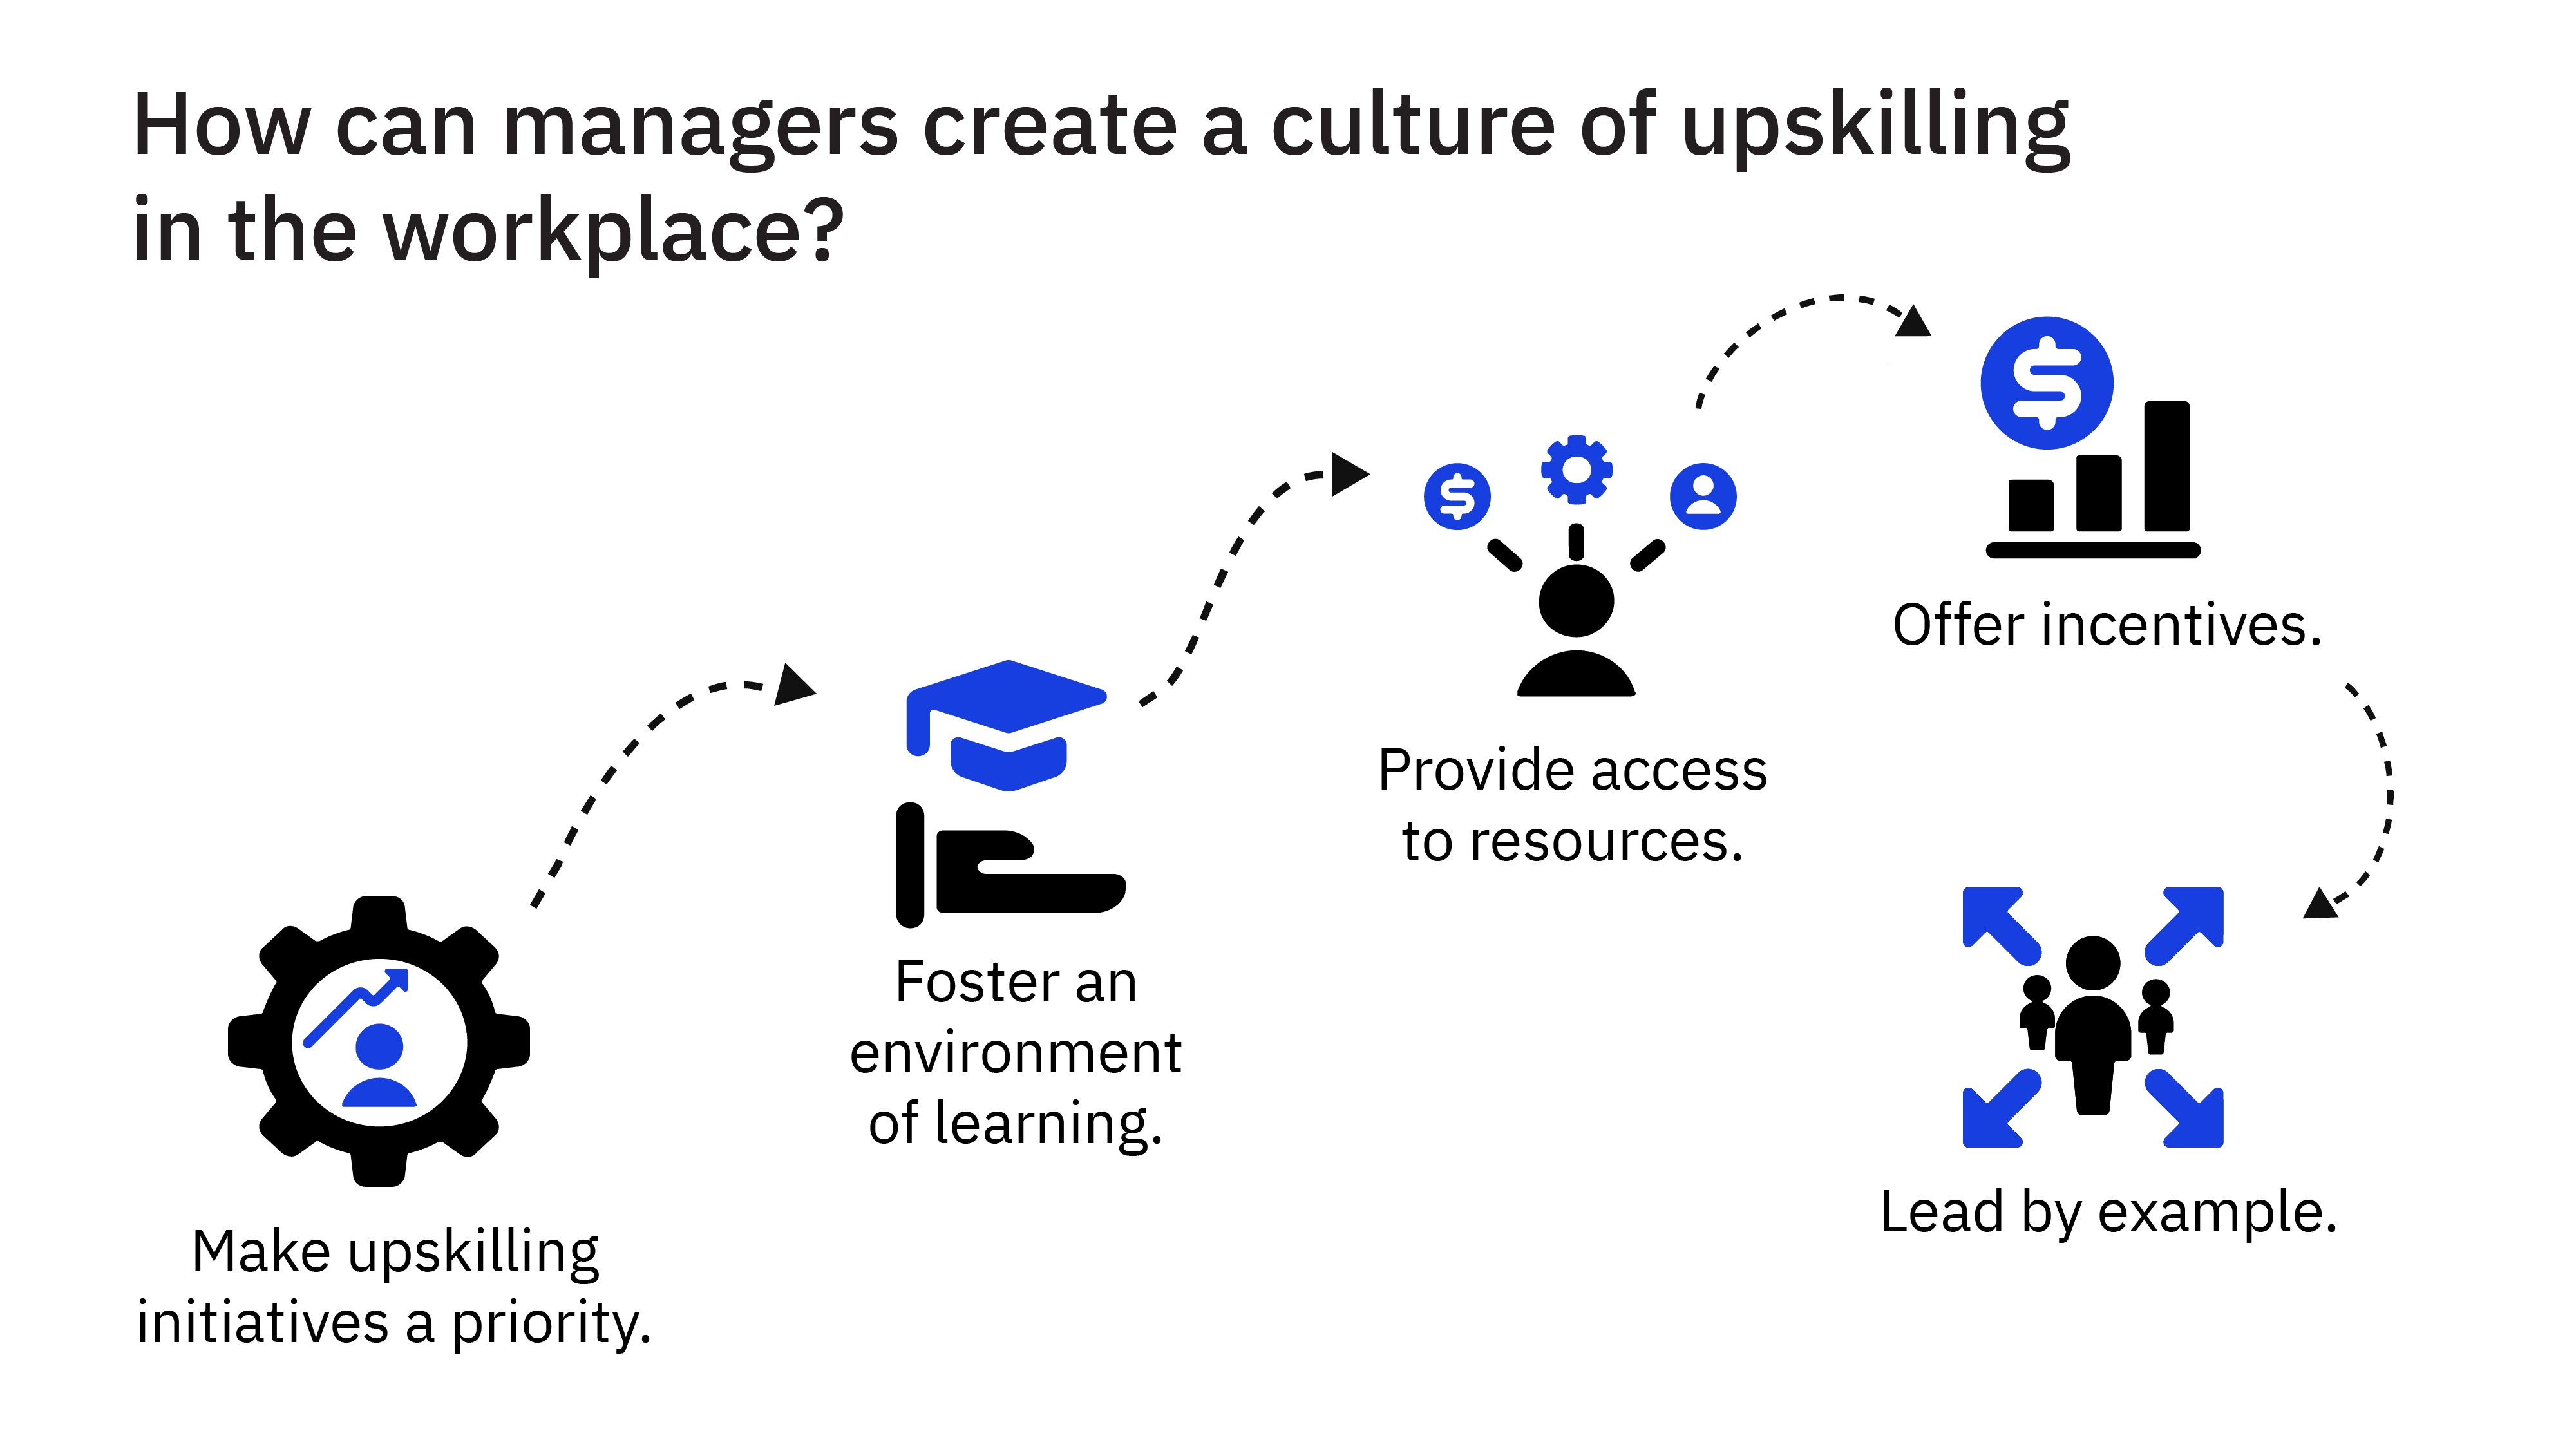 How can managers create a culture of upskilling in the workplace?